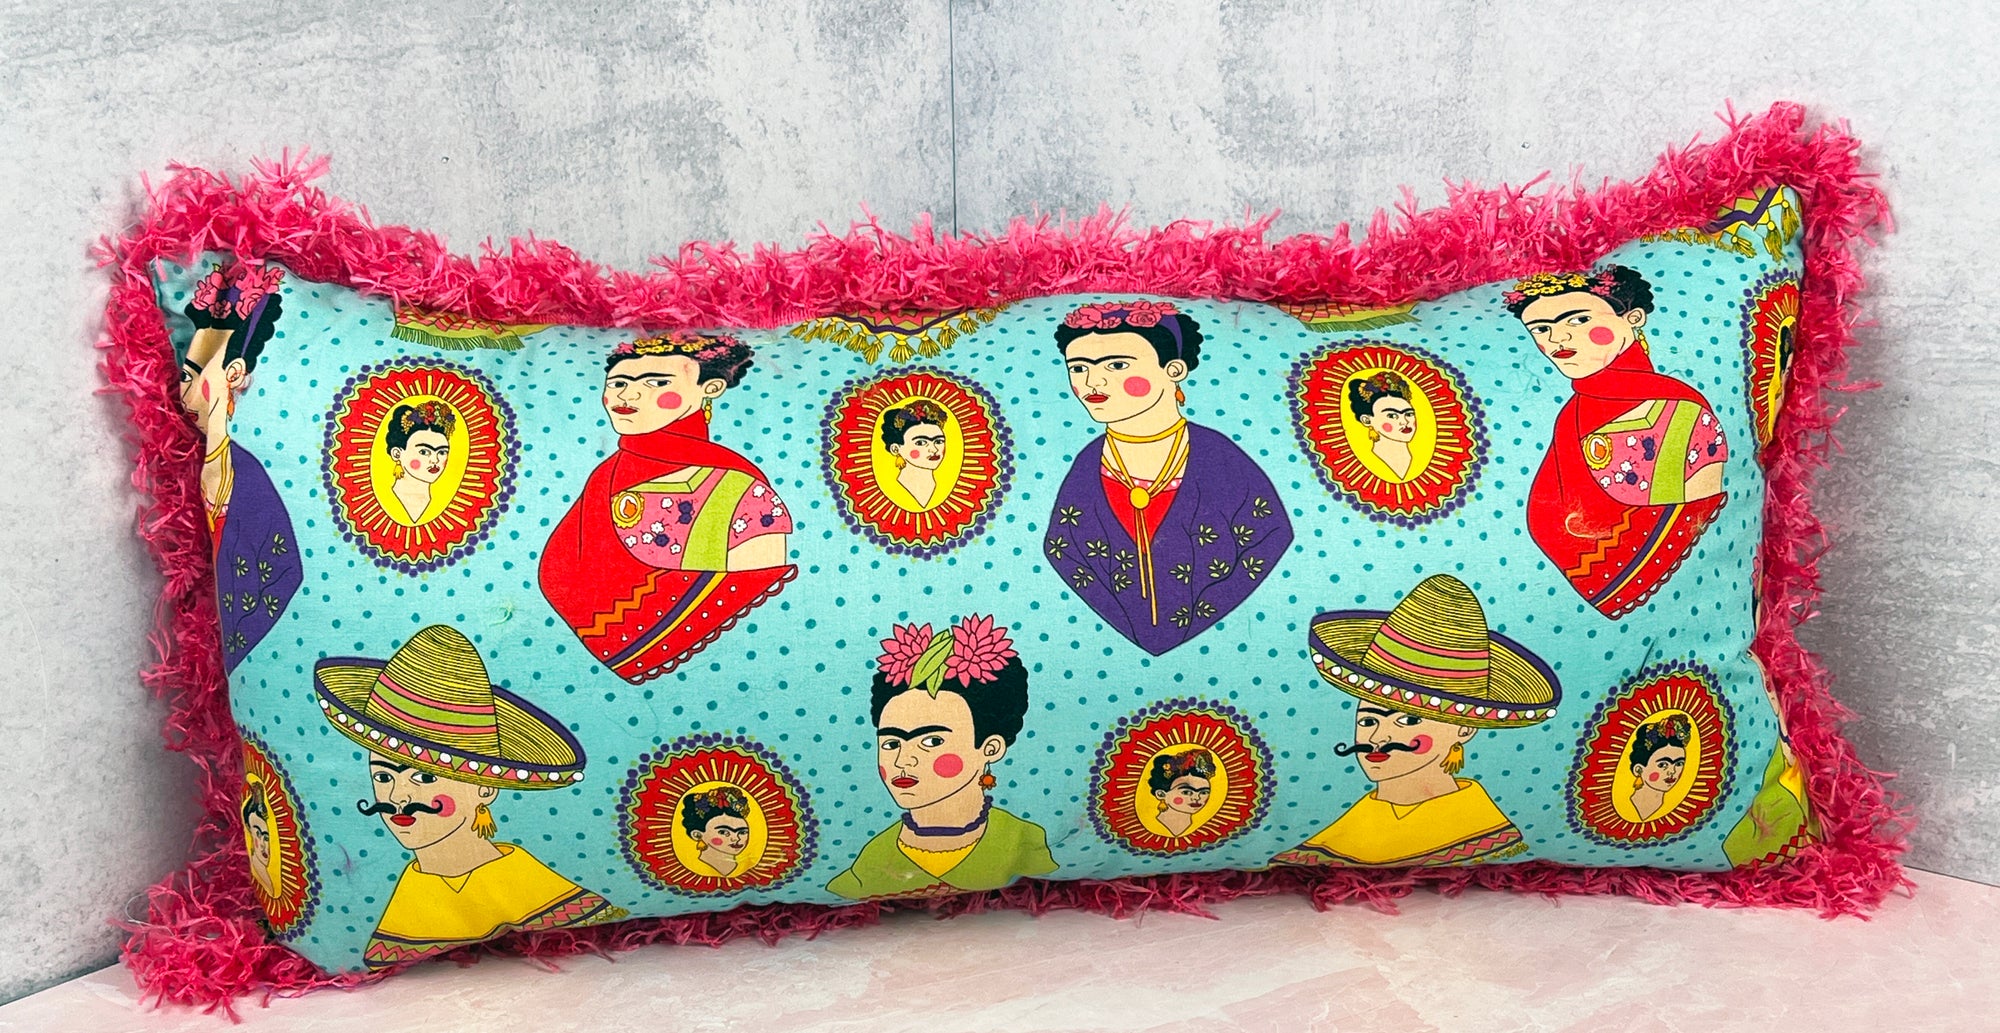 Faces of Frida Kahlo Pillow